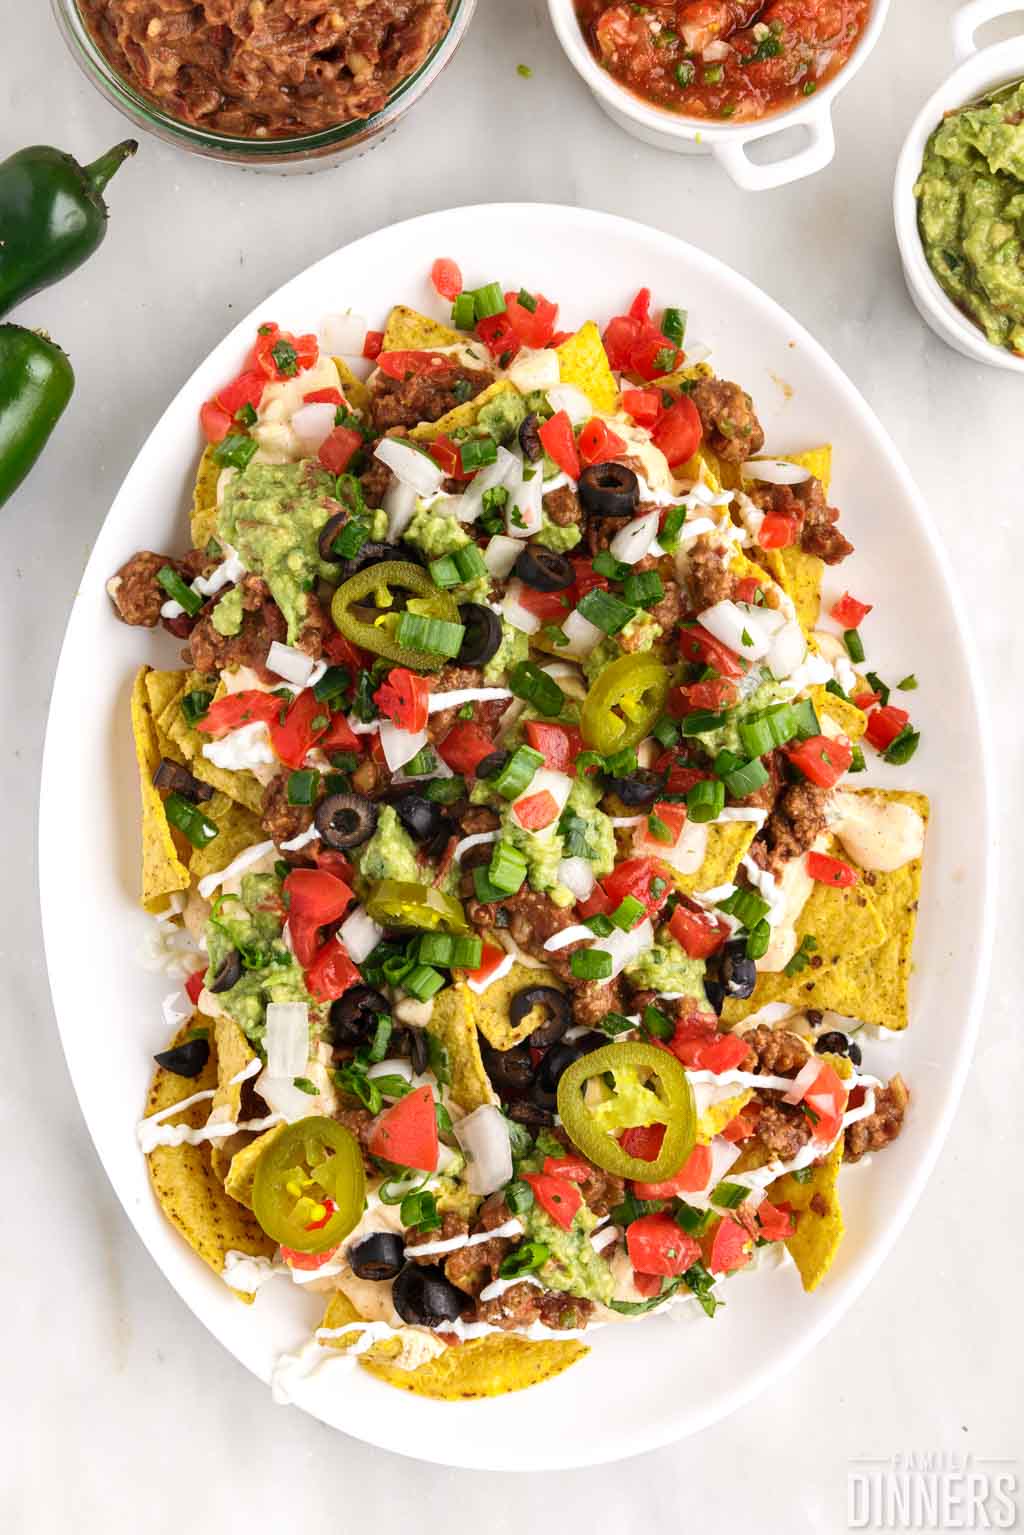 Plate of nachos with salsa, sour cream, olives, guacamole and more toppings.